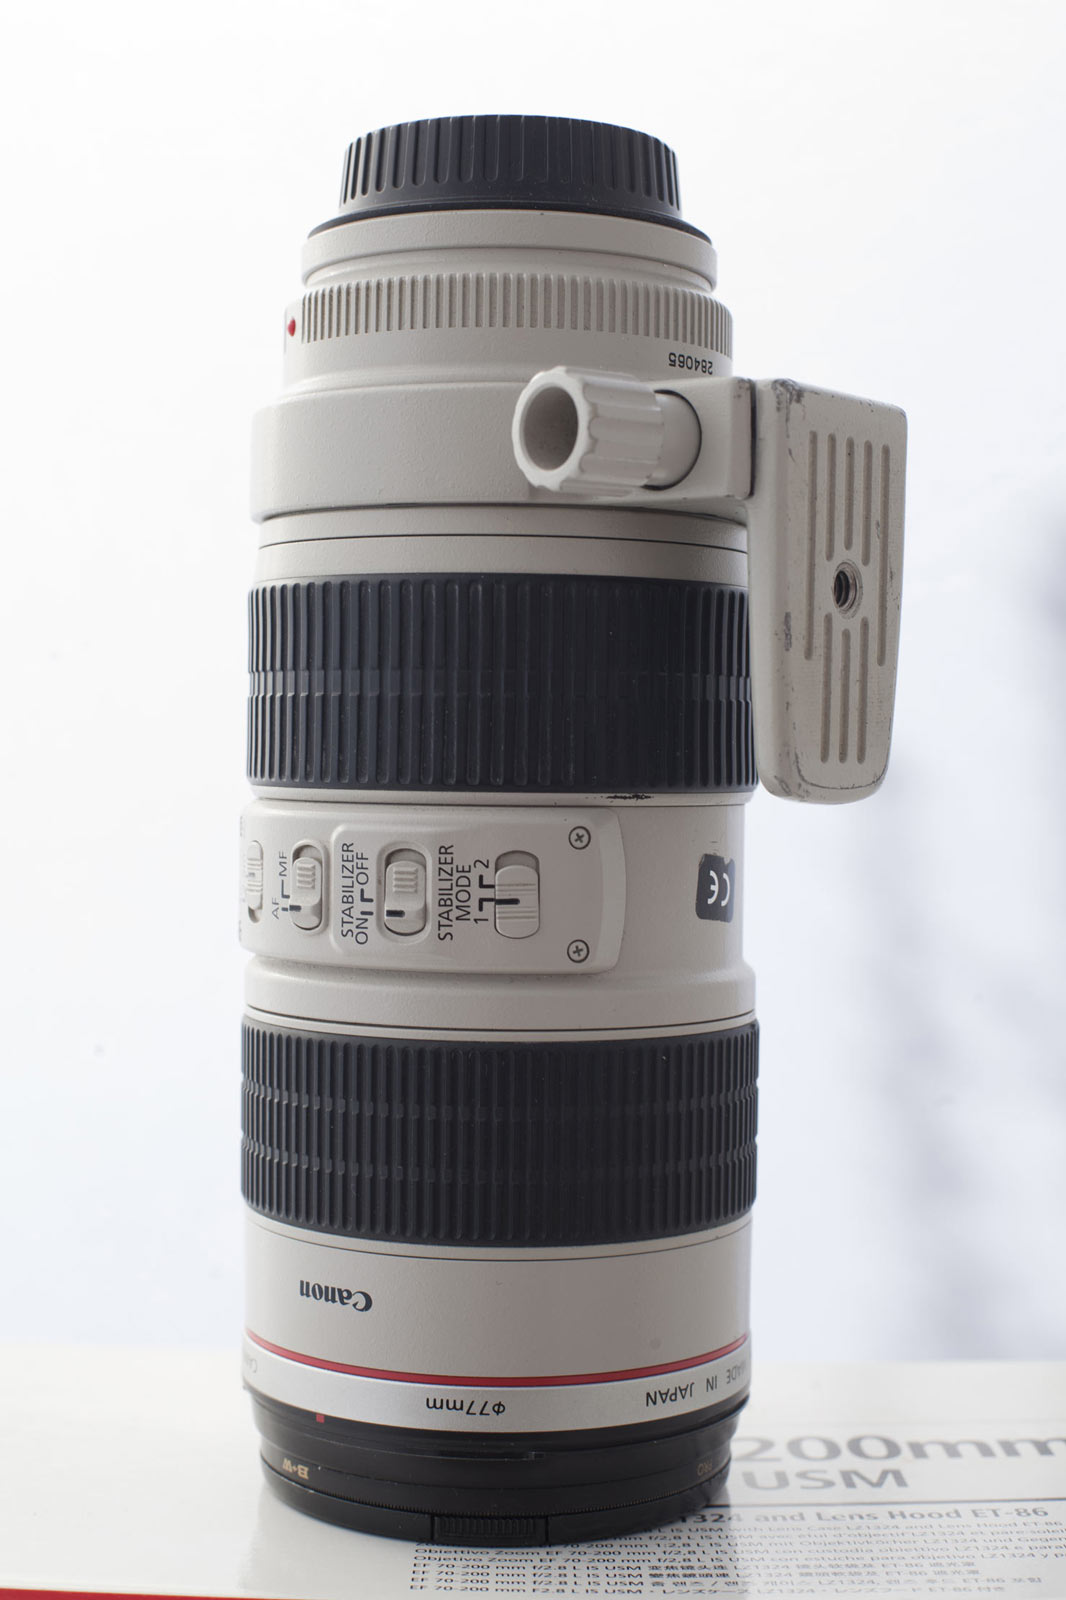 Canon EF 70-200 IS USM f/2.8L